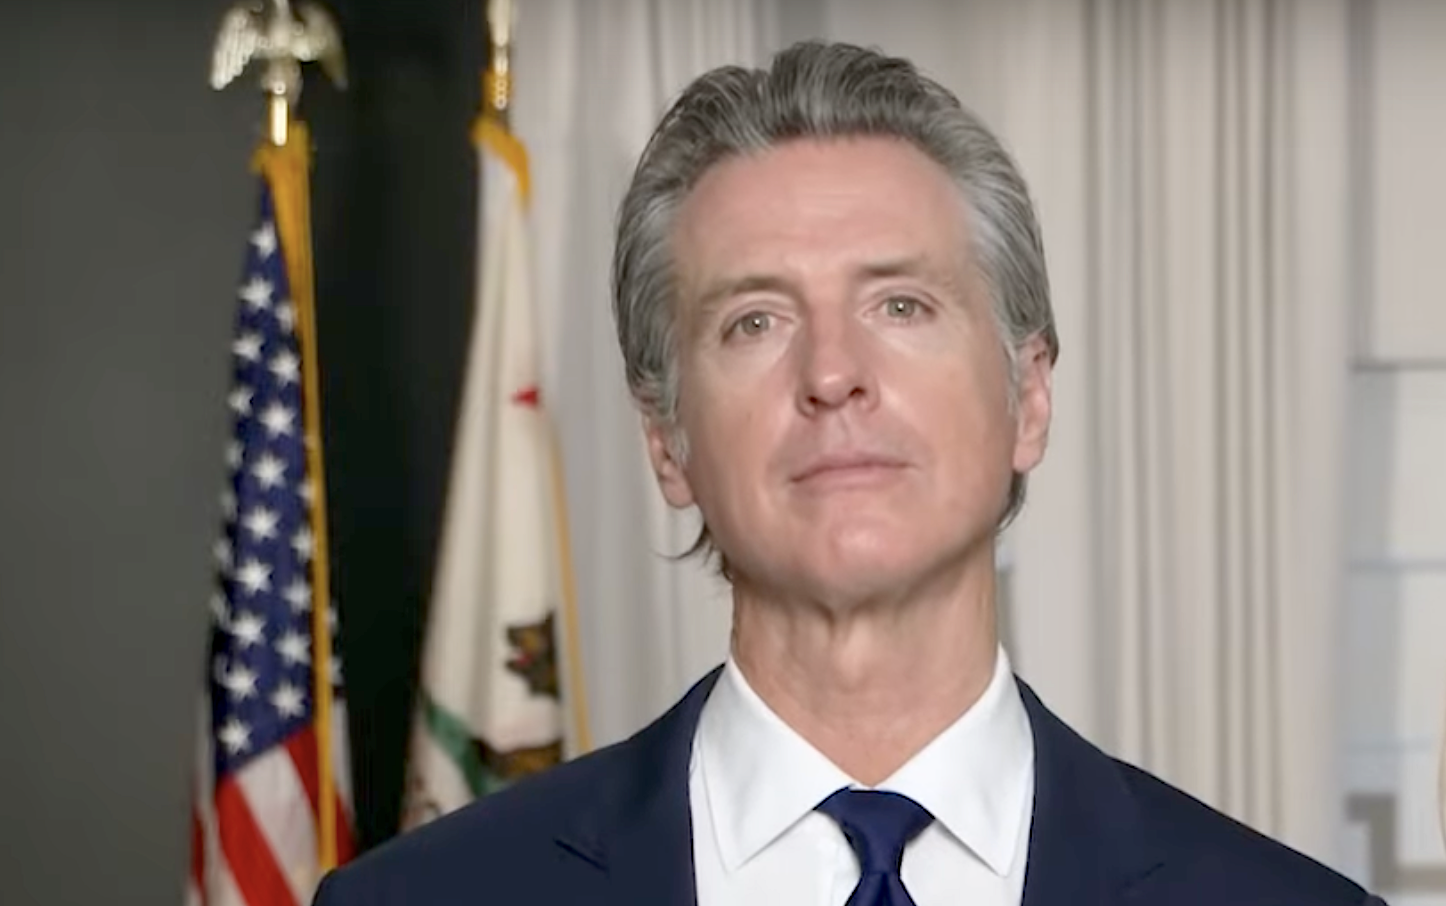 Democrats, led by Gavin Newsom, caused immense damage to our beloved state